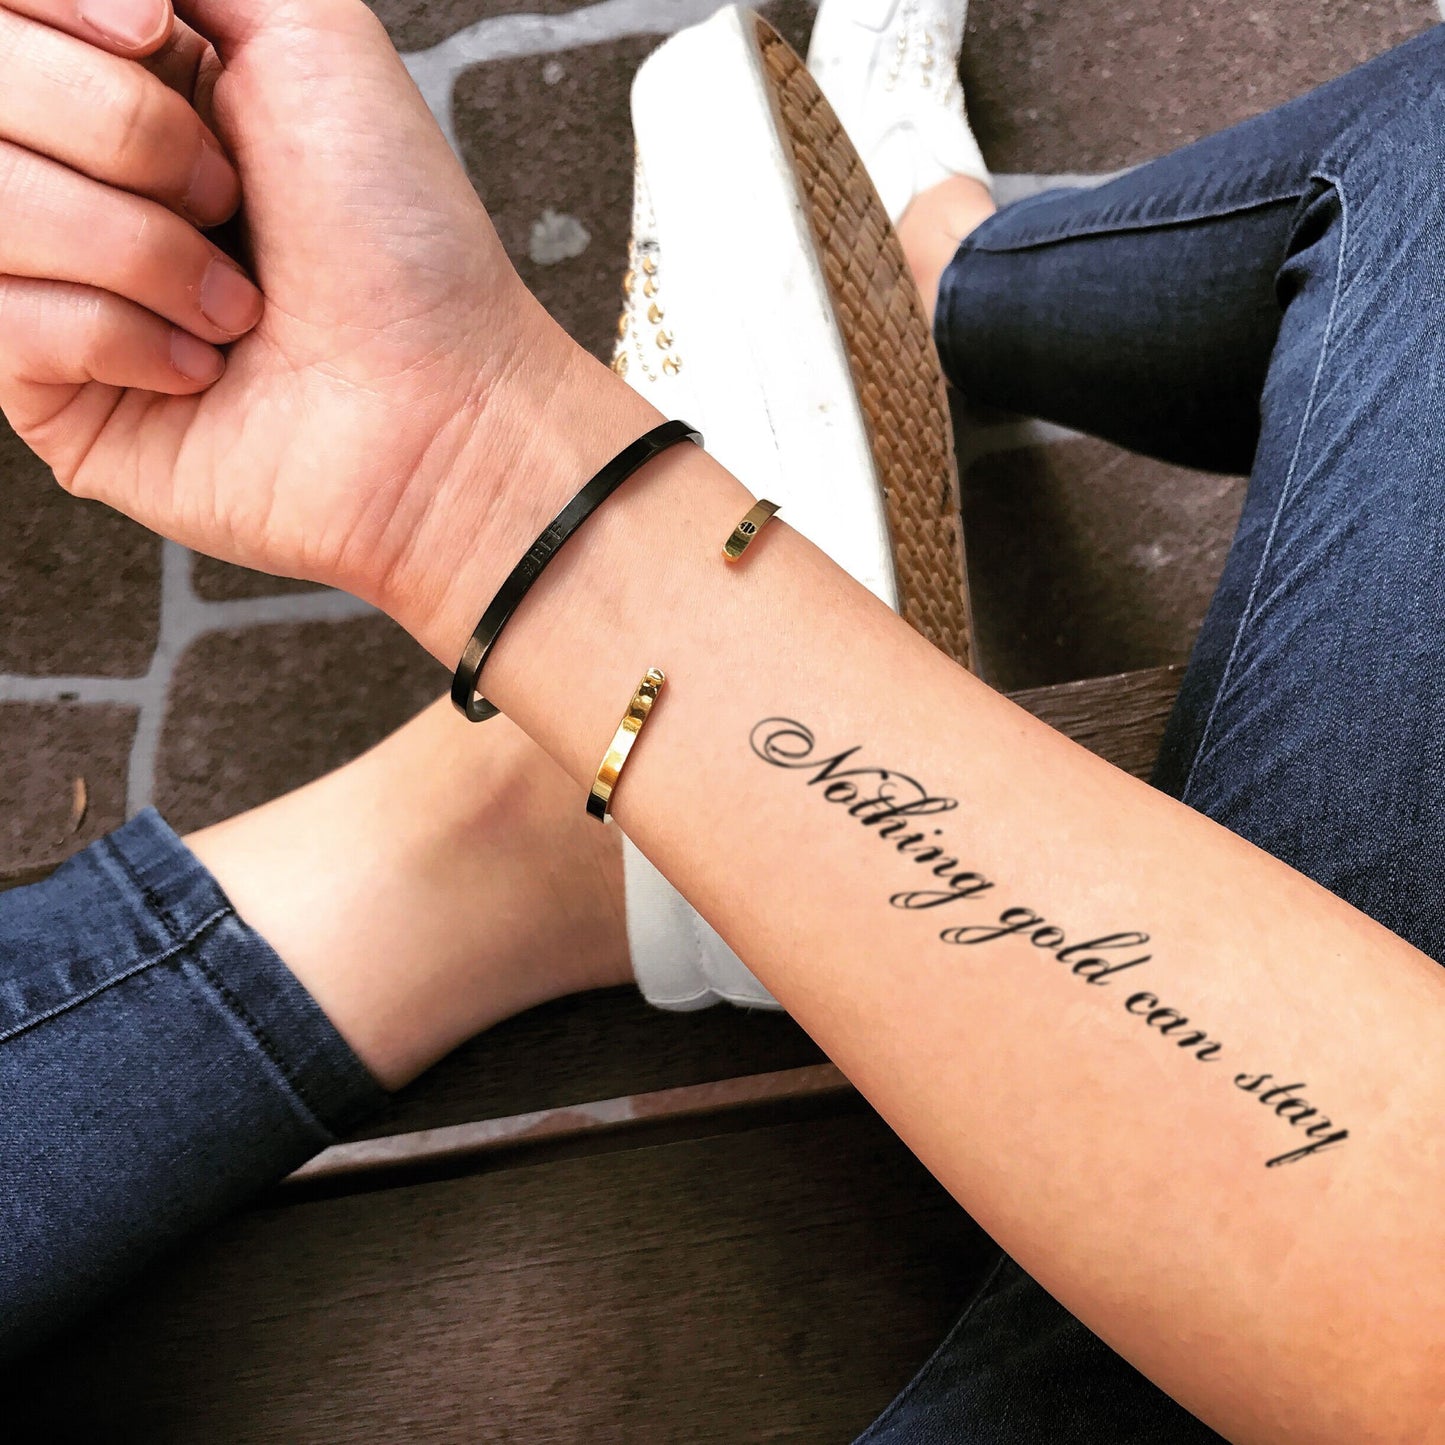 fake medium nothing gold can stay quote lettering temporary tattoo sticker design idea on forearm